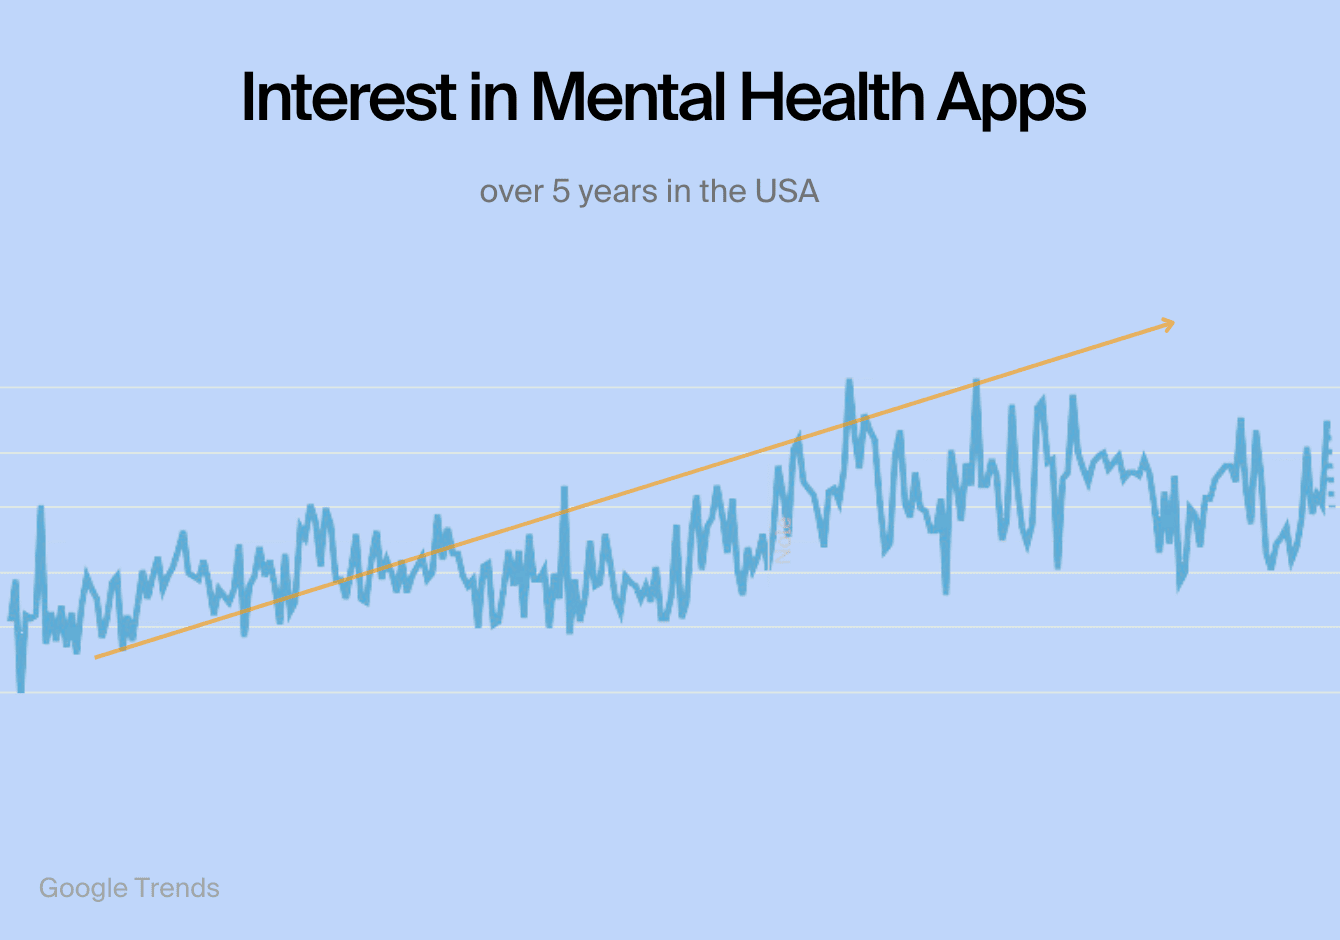 interest in mental health apps over the last 5 years in the USA